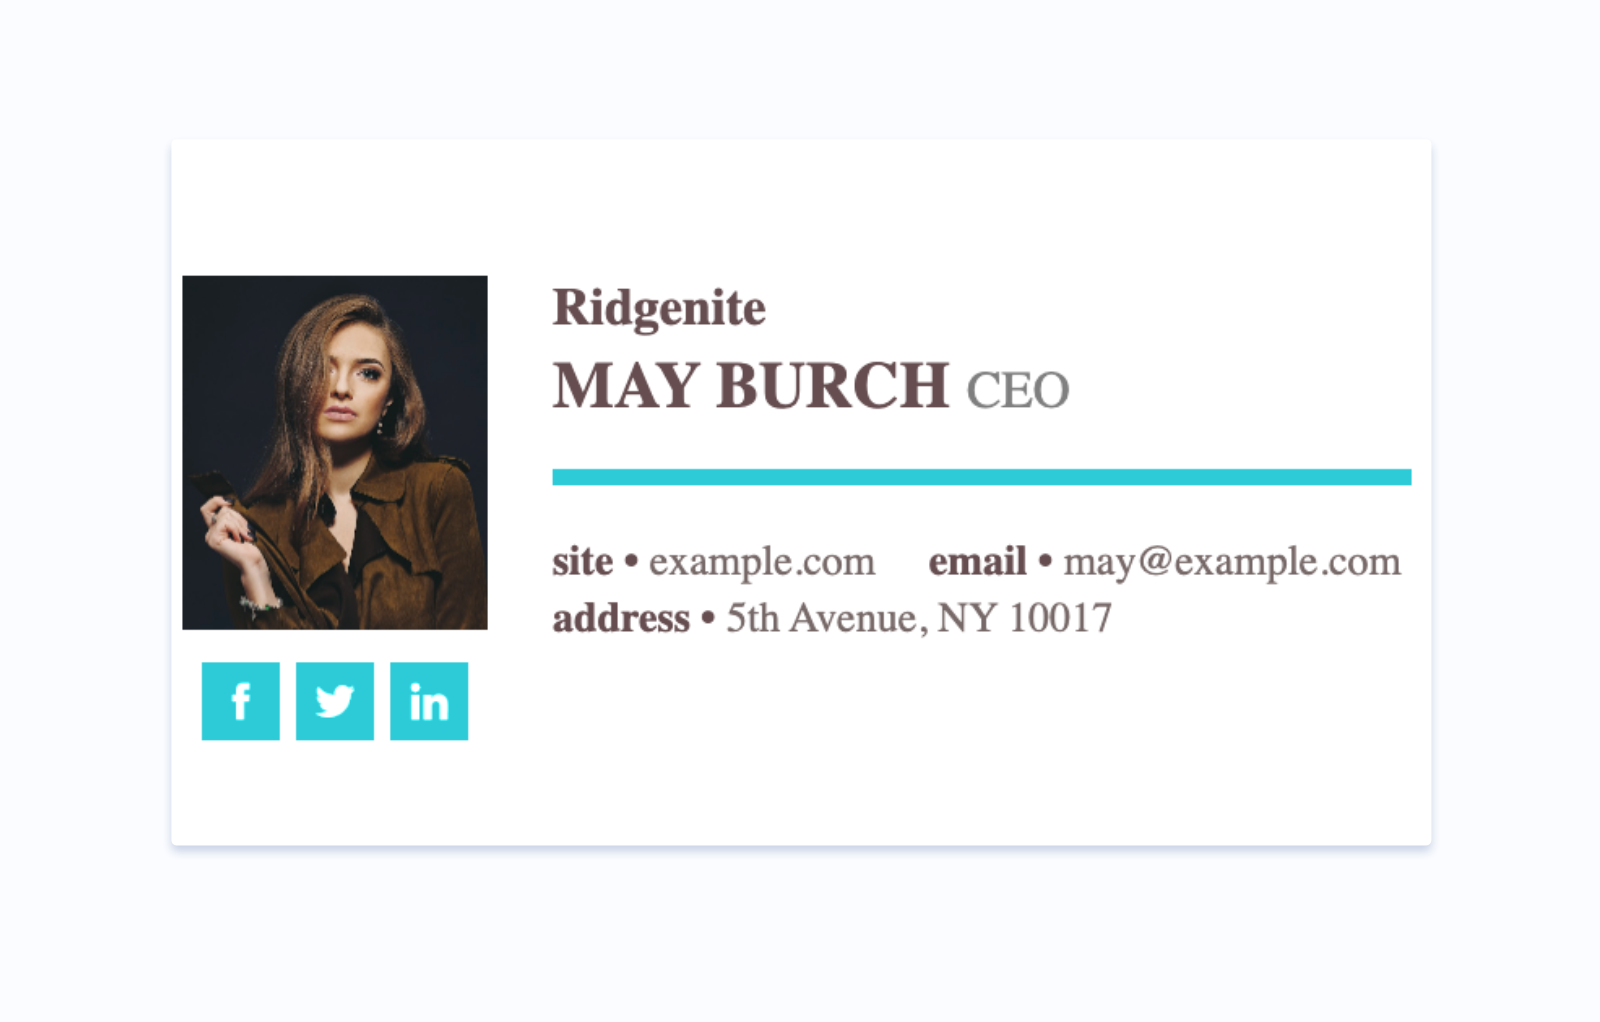 Add your photo or logo to the business email footer